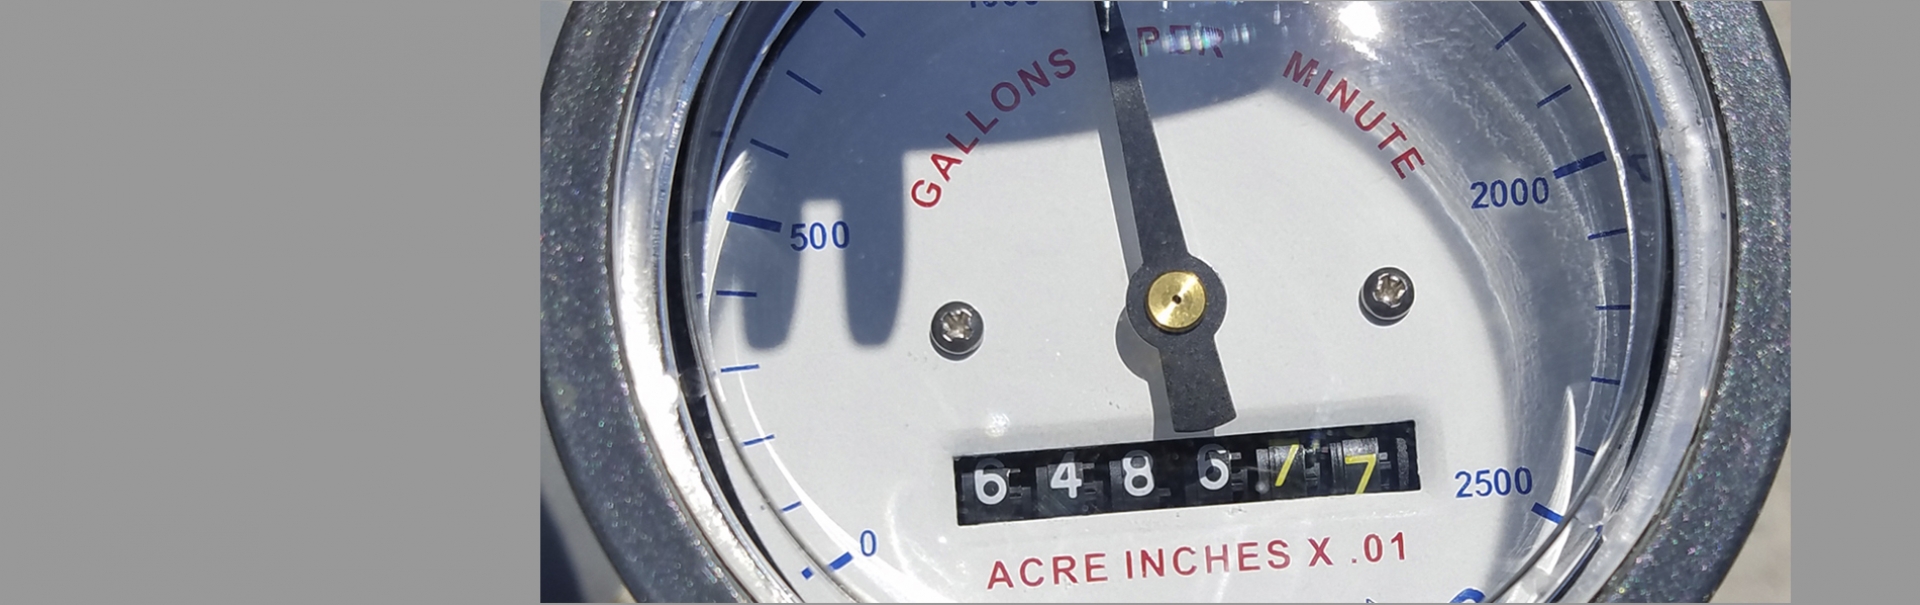 Meter in Gallons per Minute - Acre Inches x .01